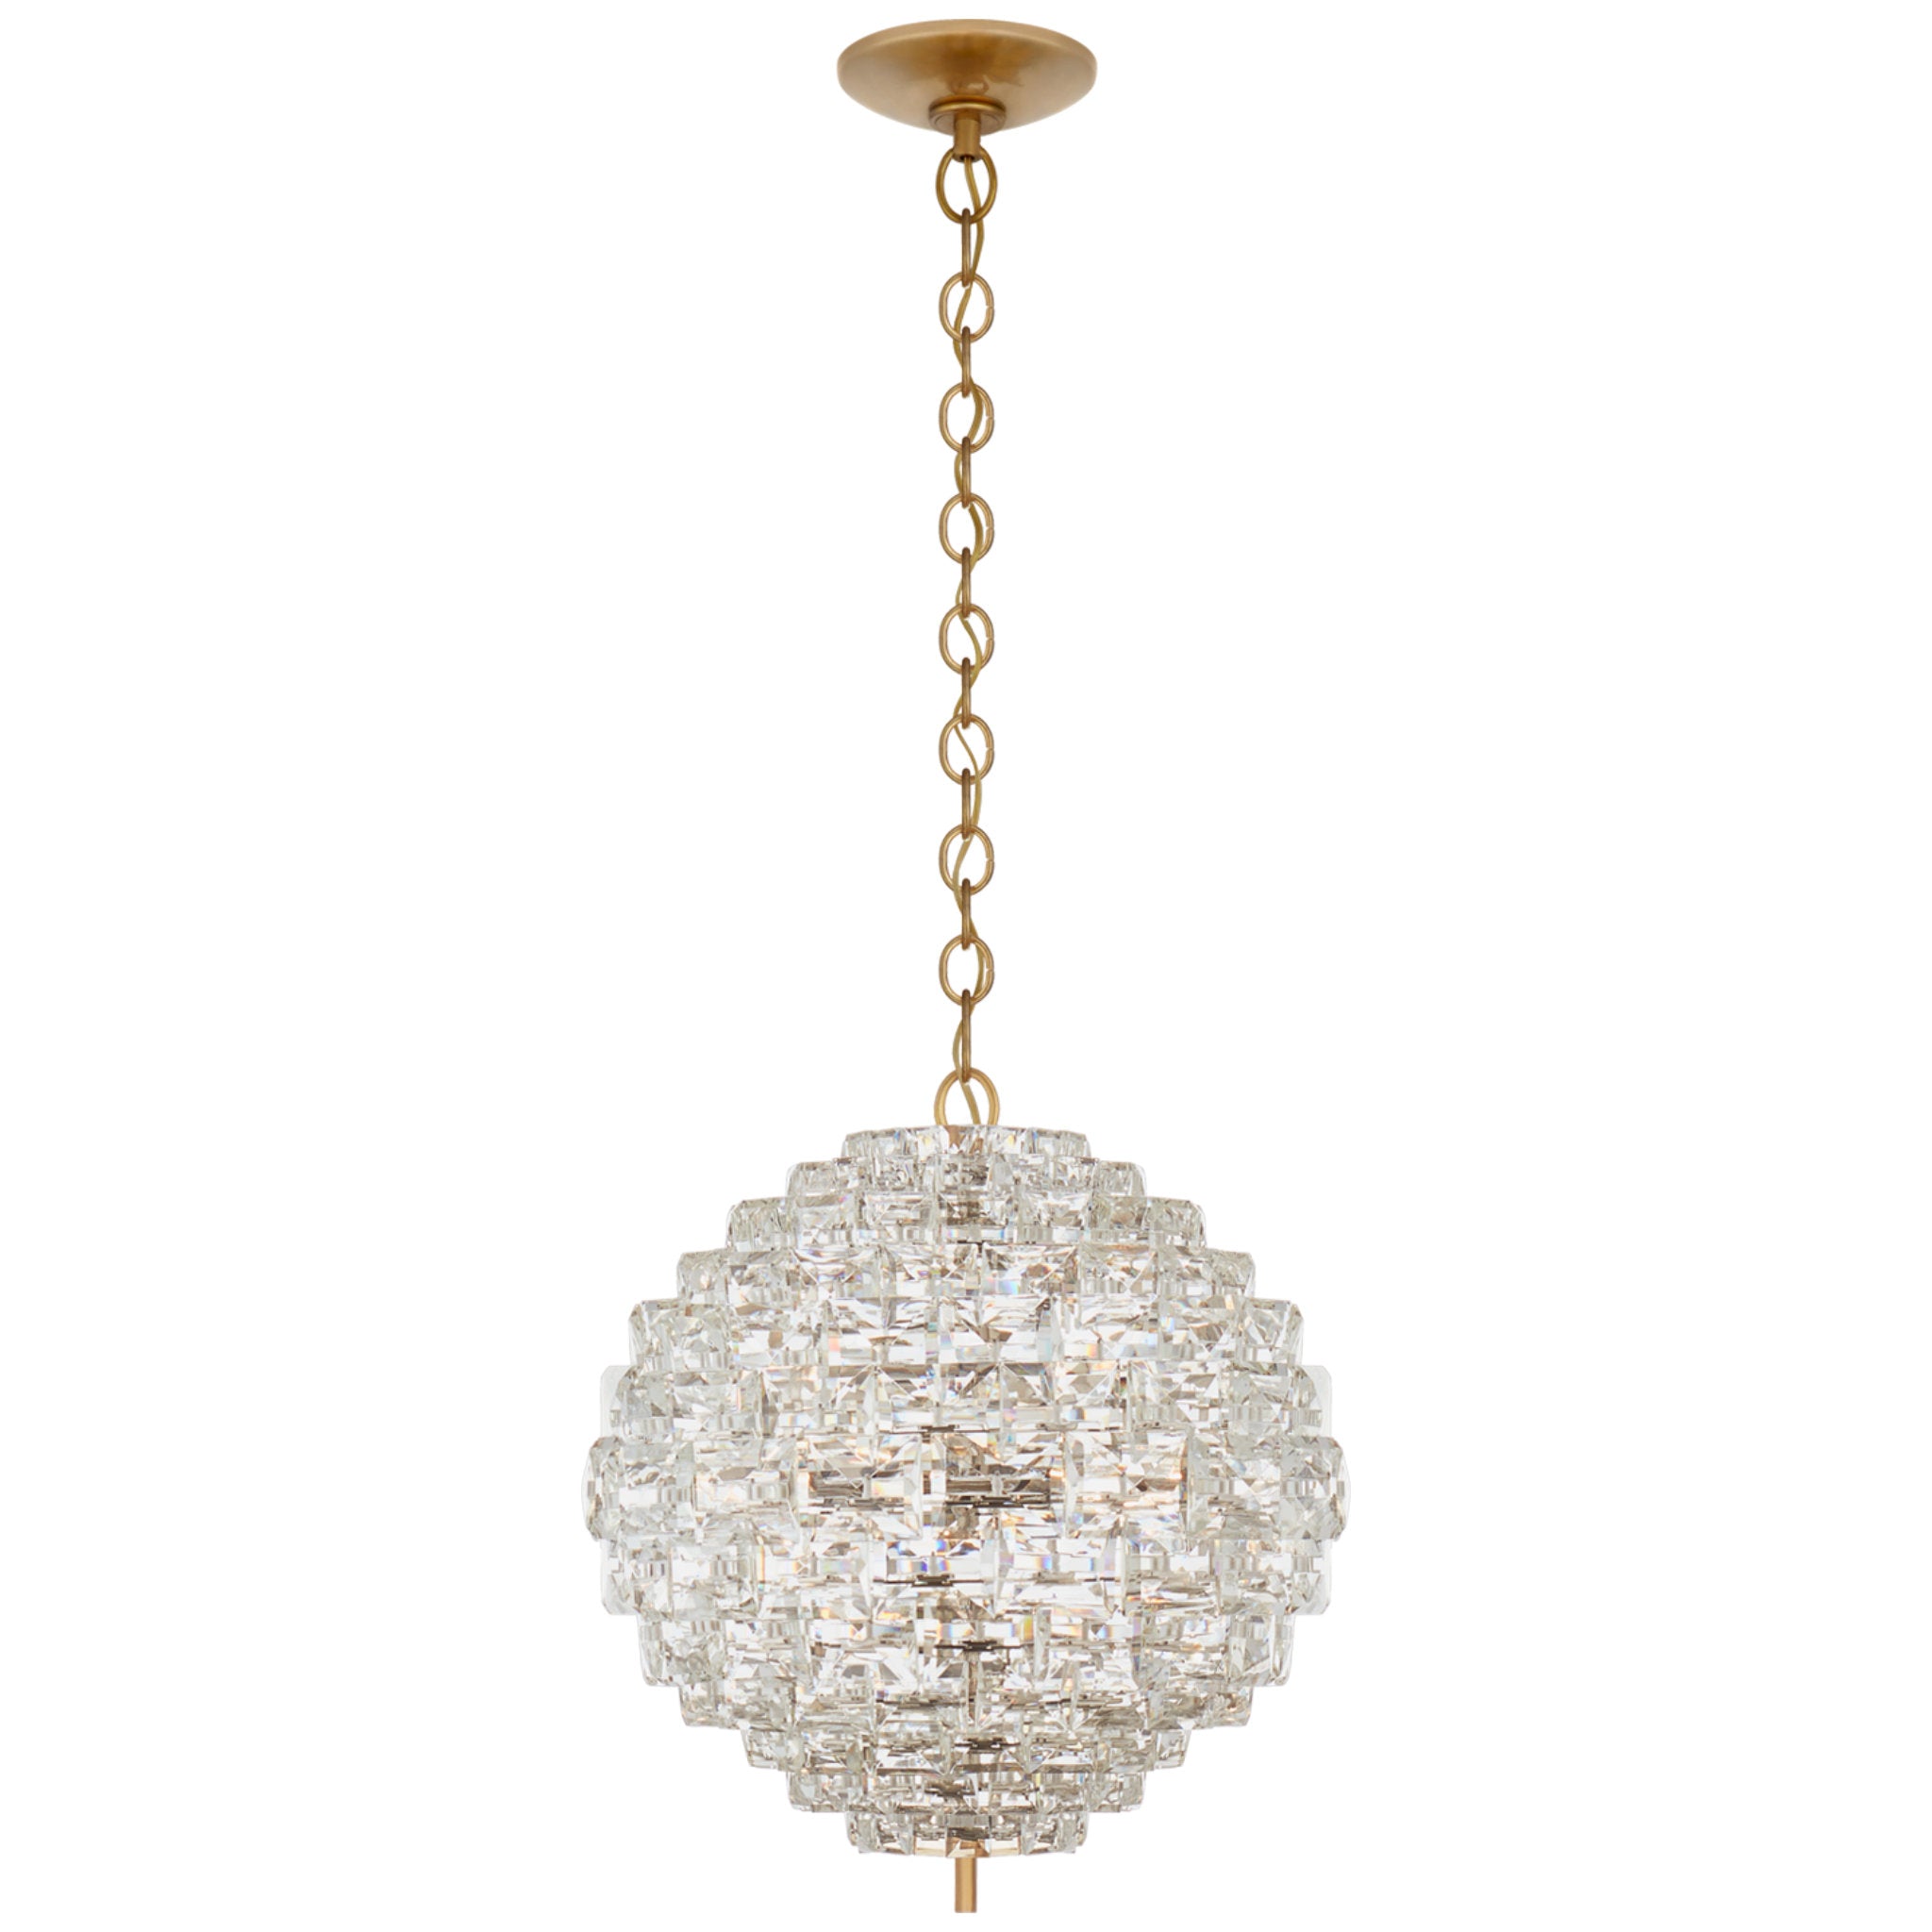 Chapman & Myers Karina Medium Sphere Chandelier in Antique-Burnished Brass and Crystal